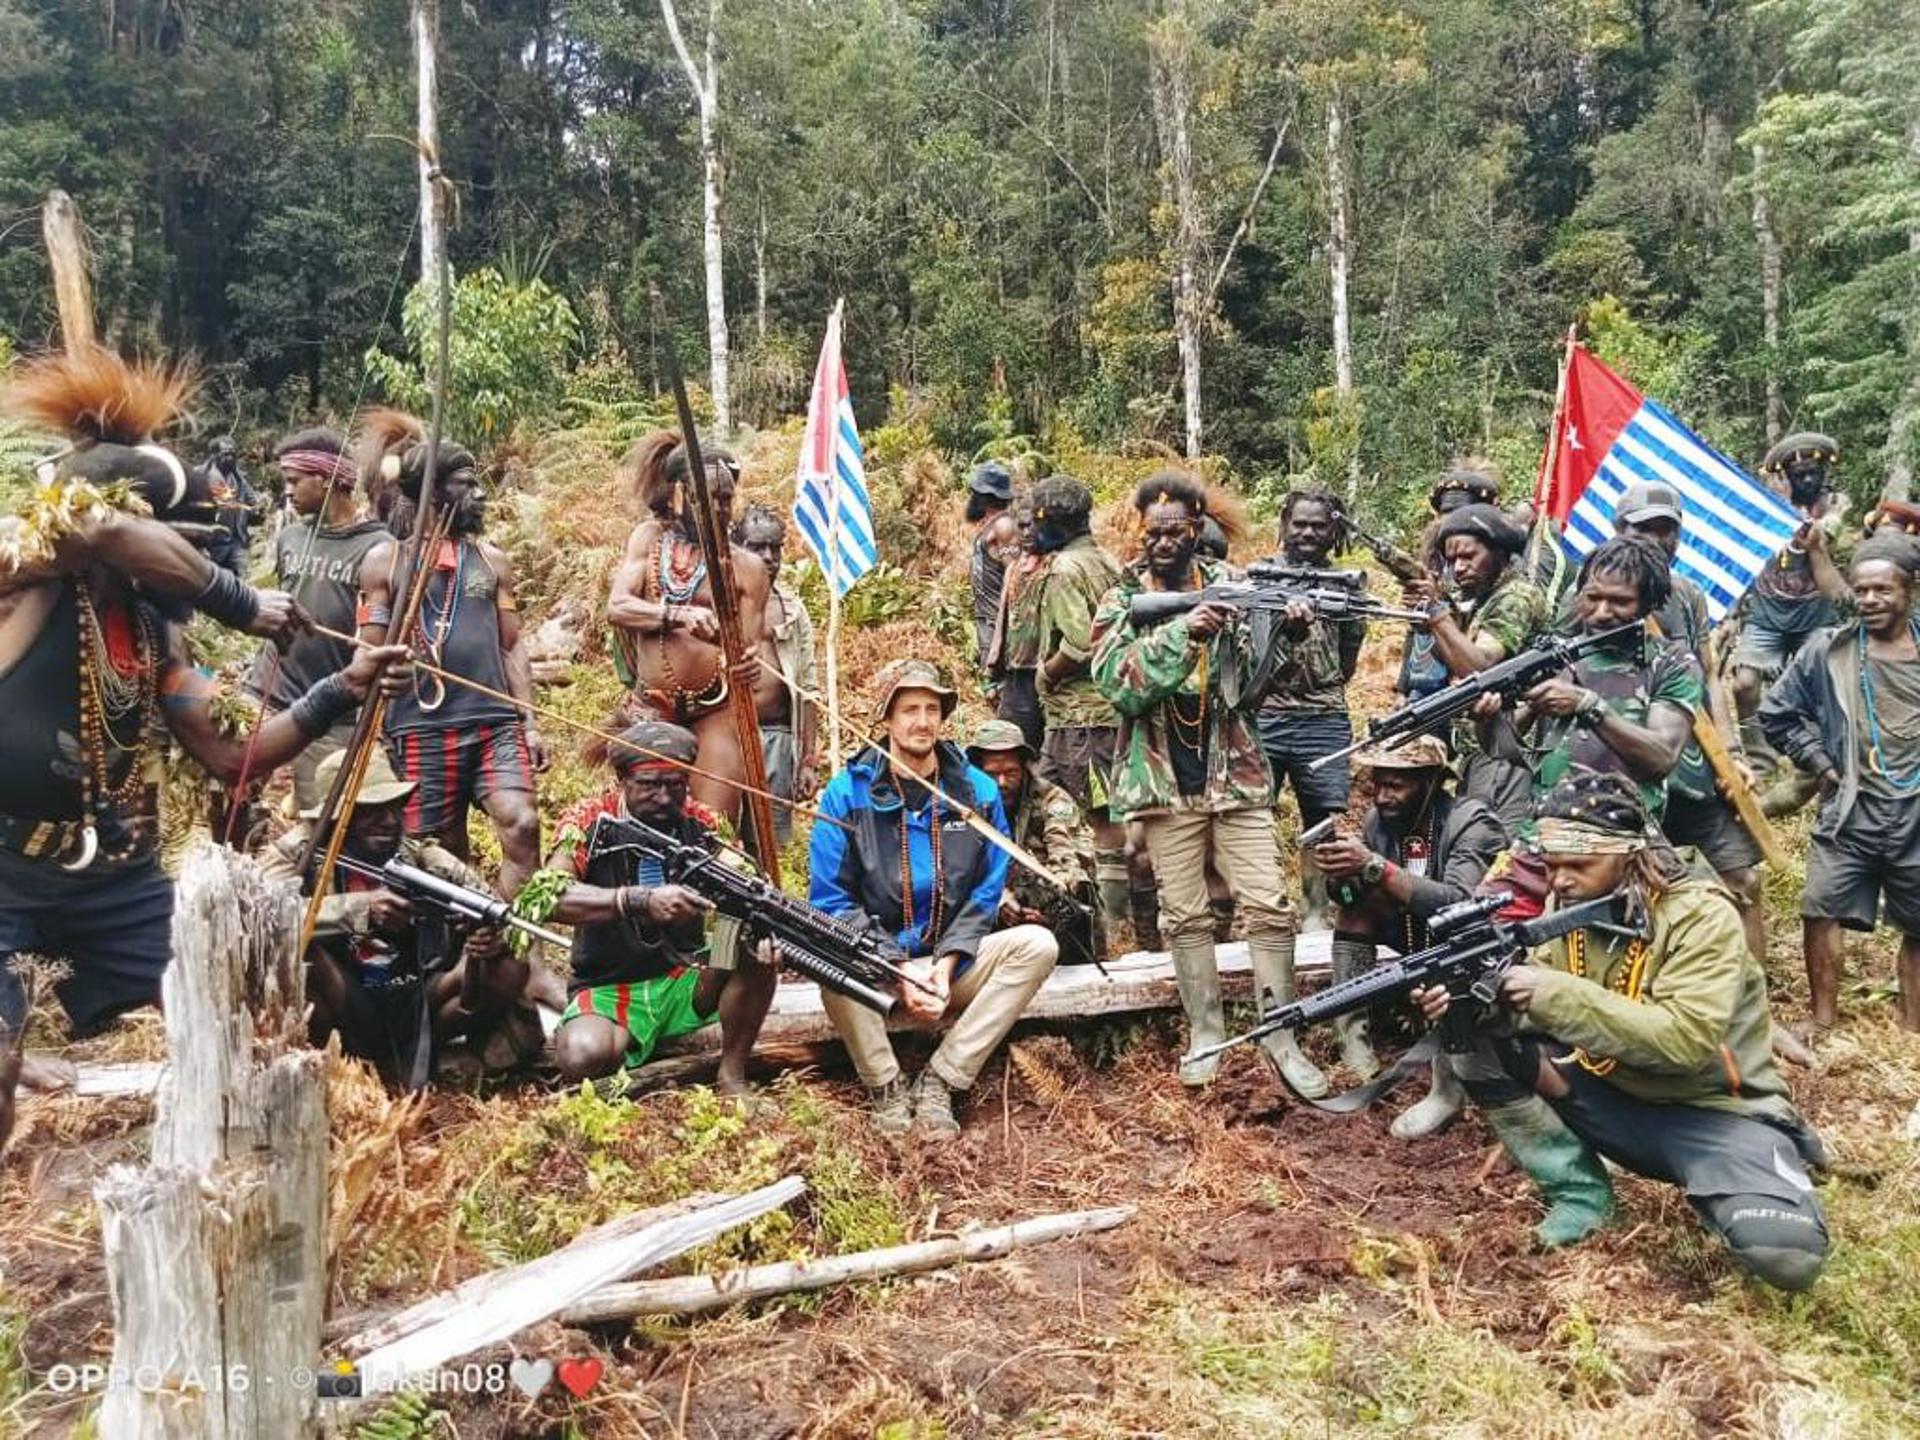 An undated handout photo provided by the West Papua National Liberation Army (TPNPB) shows New Zealand pilot Phillip Mehrtens surrounded by his captors in an undisclosed location in Indonesian Papua, western New Guinea. EFE/HANDOUT/TPNPB
